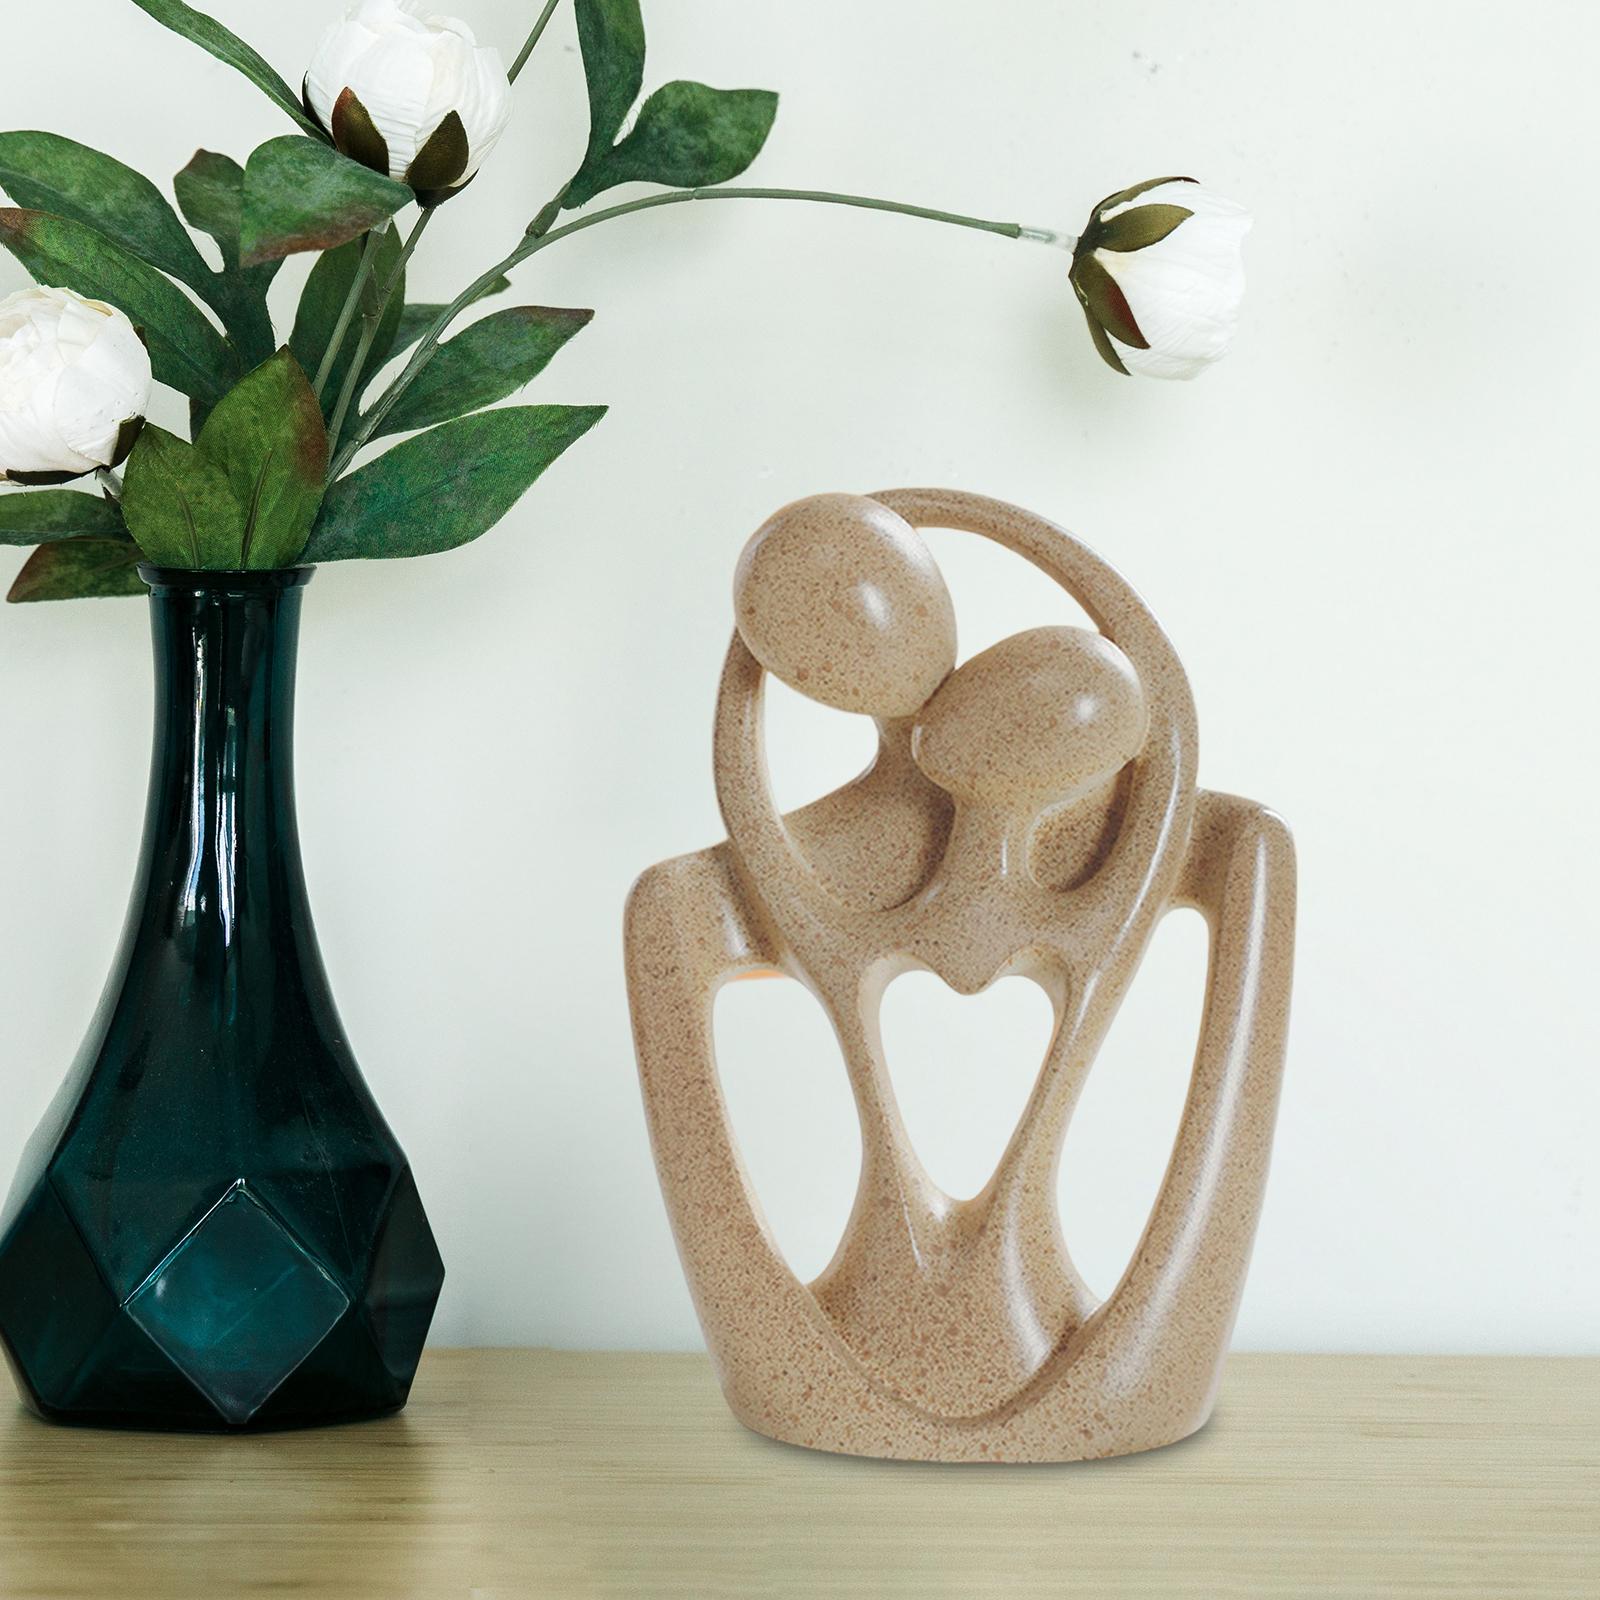 Abstract Couple Statue Couple Figurine Ornament Art for Desk Party Bookshelf Gray